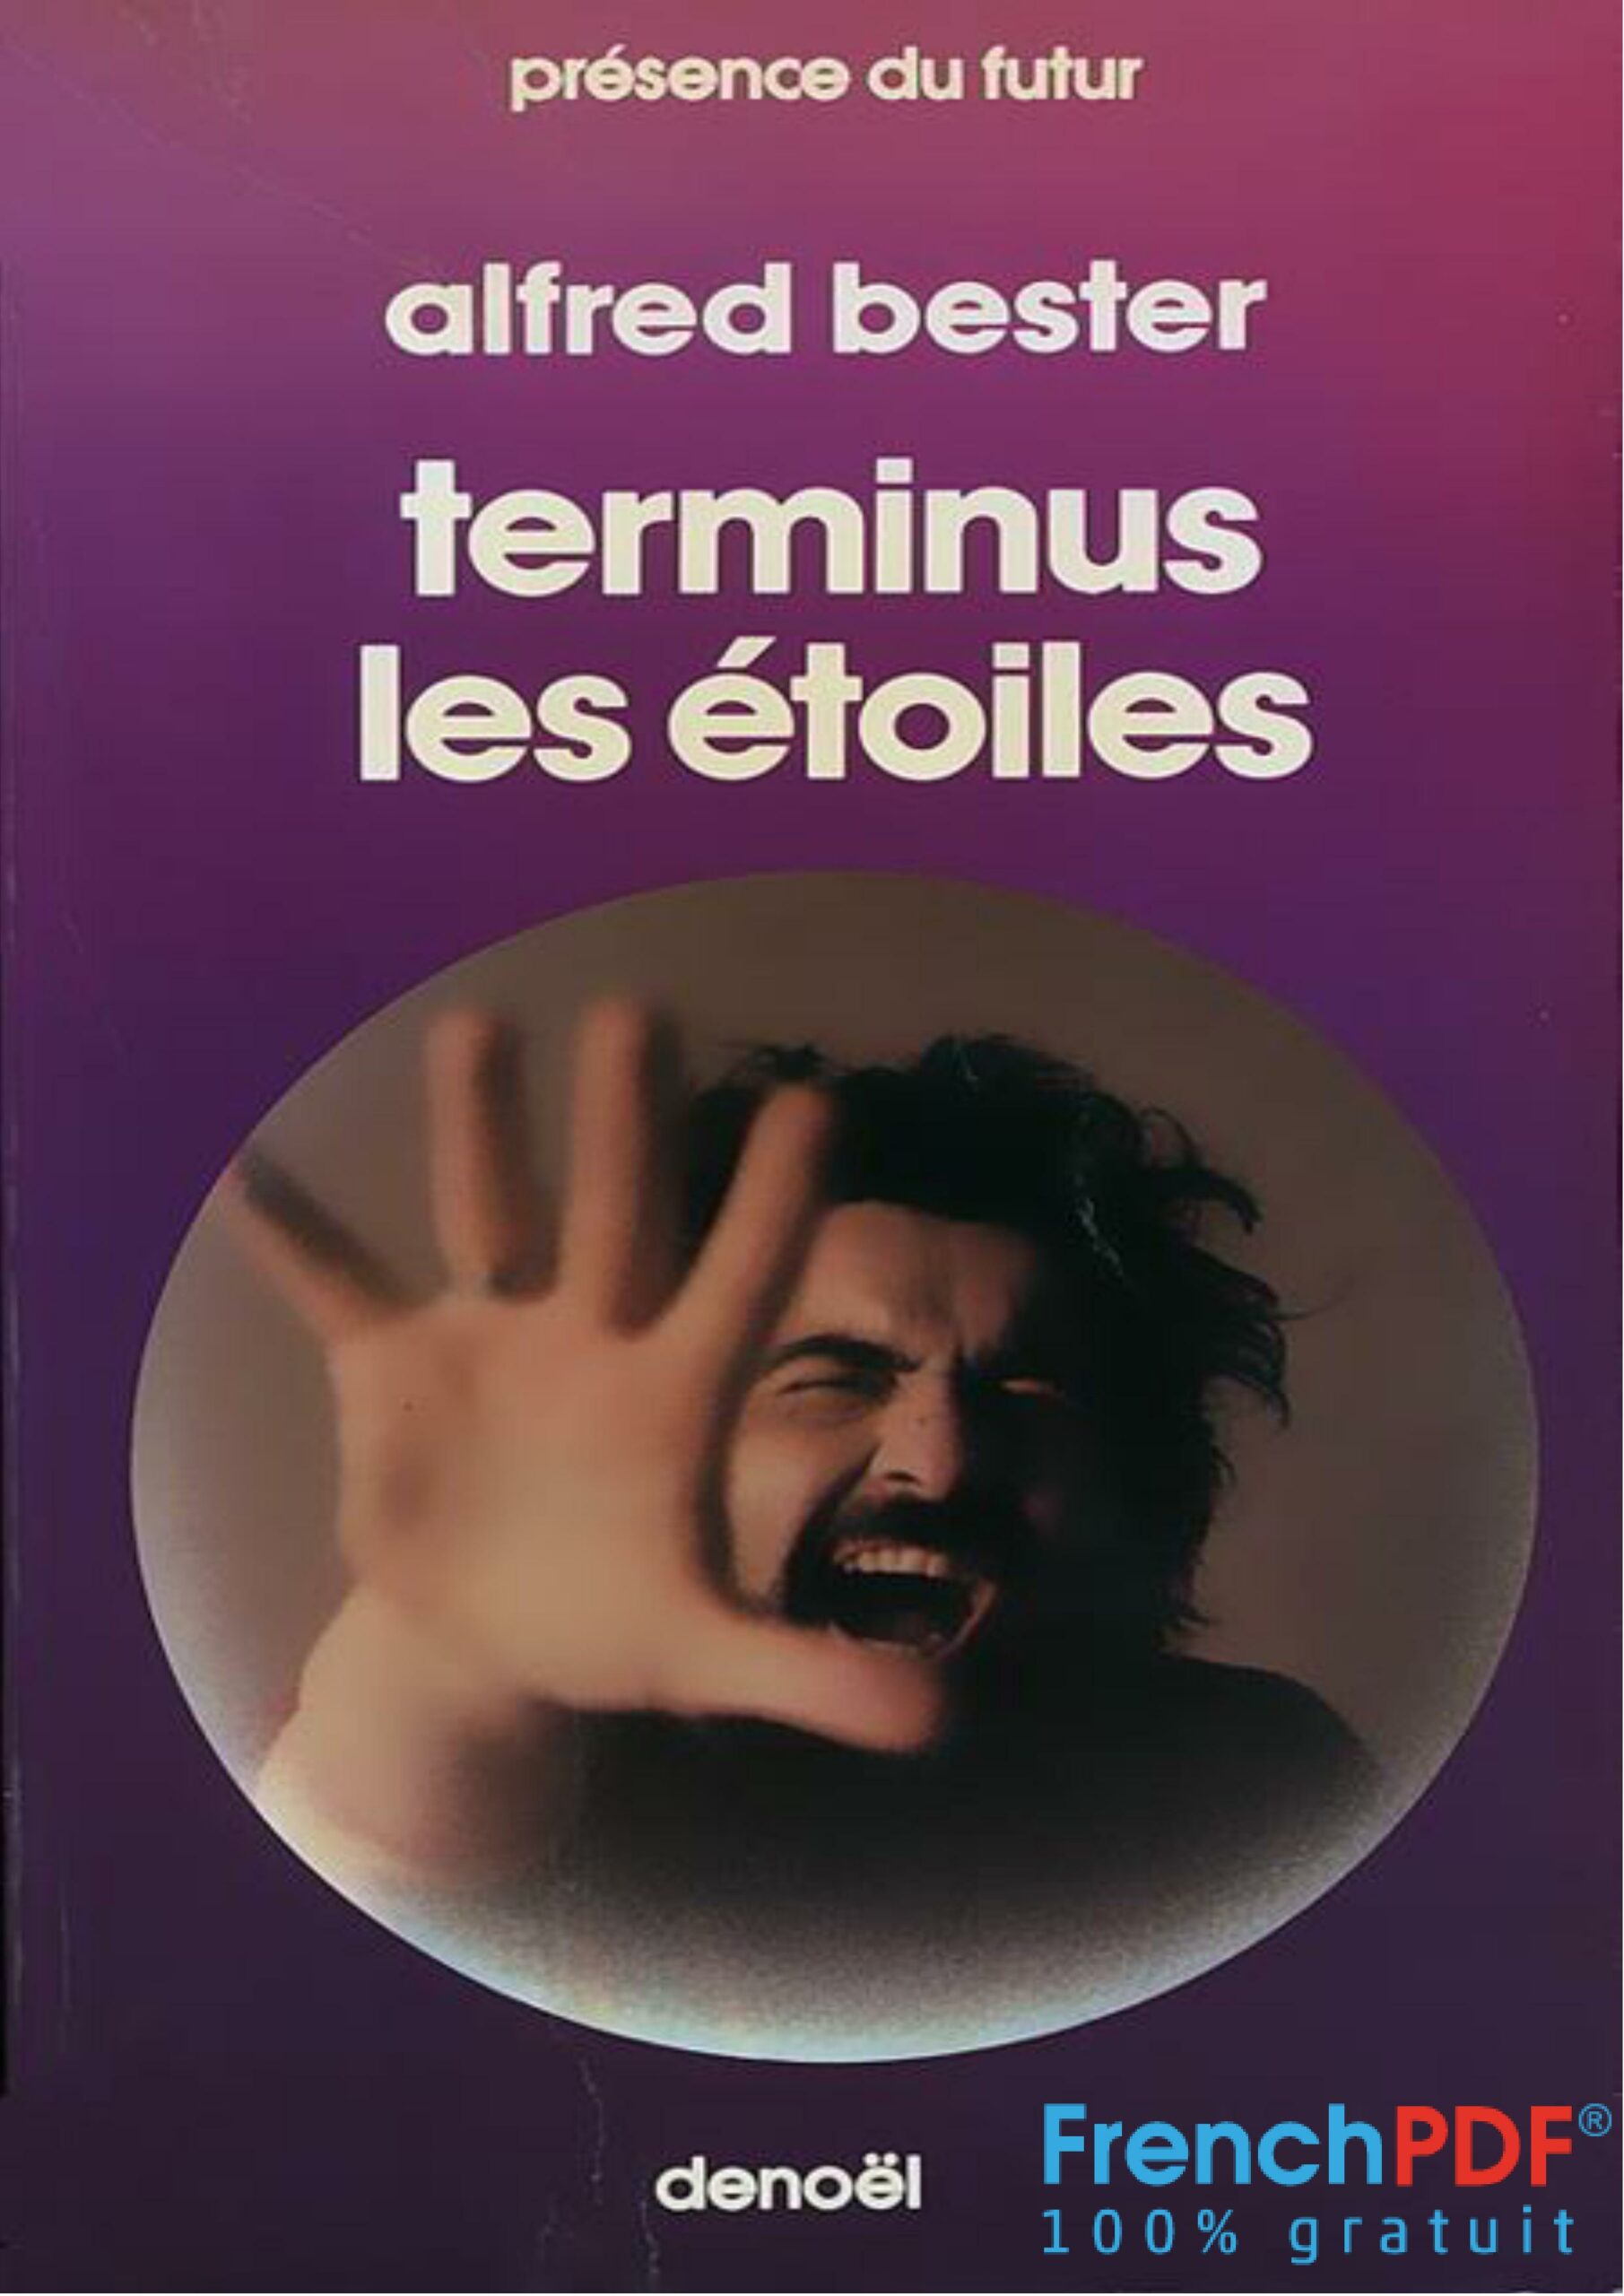 Terminus, les étoiles - Alfred Bester - FrenchPDF.com